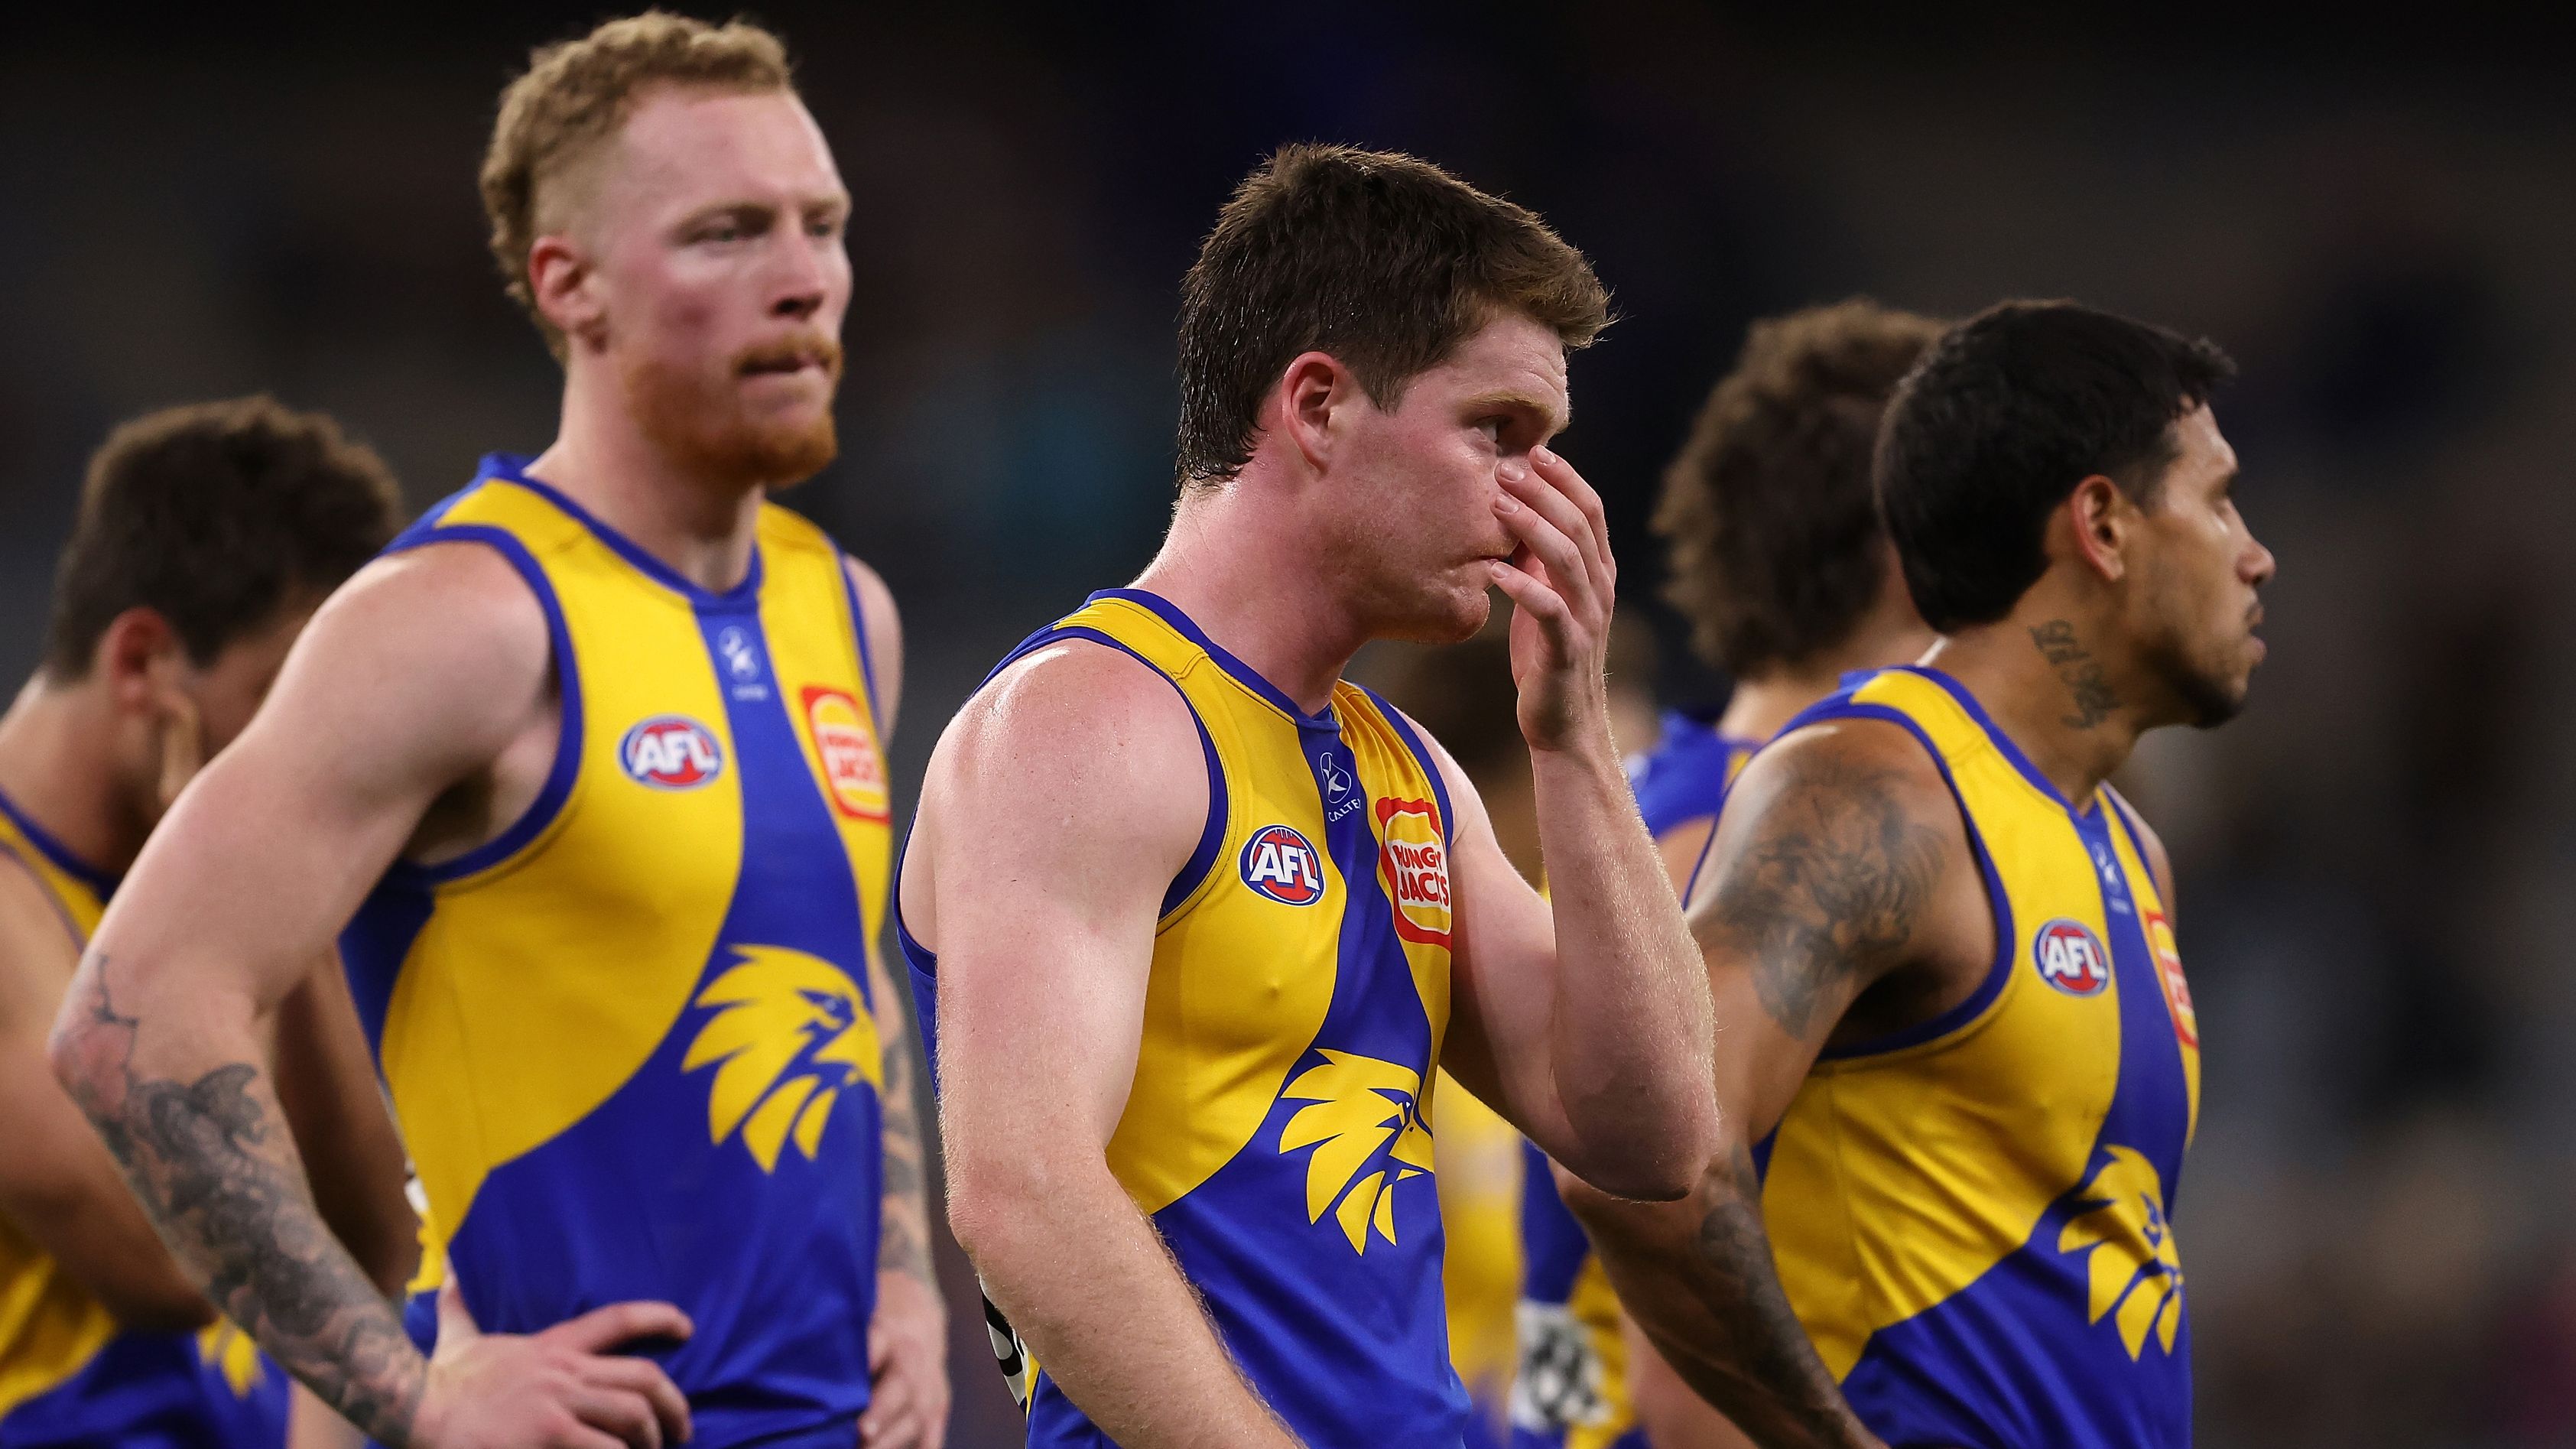 PERTH, AUSTRALIA - AUGUST 12: Luke Foley of the Eagles looks on after being defeated during the round 22 AFL match between West Coast Eagles and Fremantle Dockers at Optus Stadium, on August 12, 2023, in Perth, Australia. (Photo by Paul Kane/Getty Images)